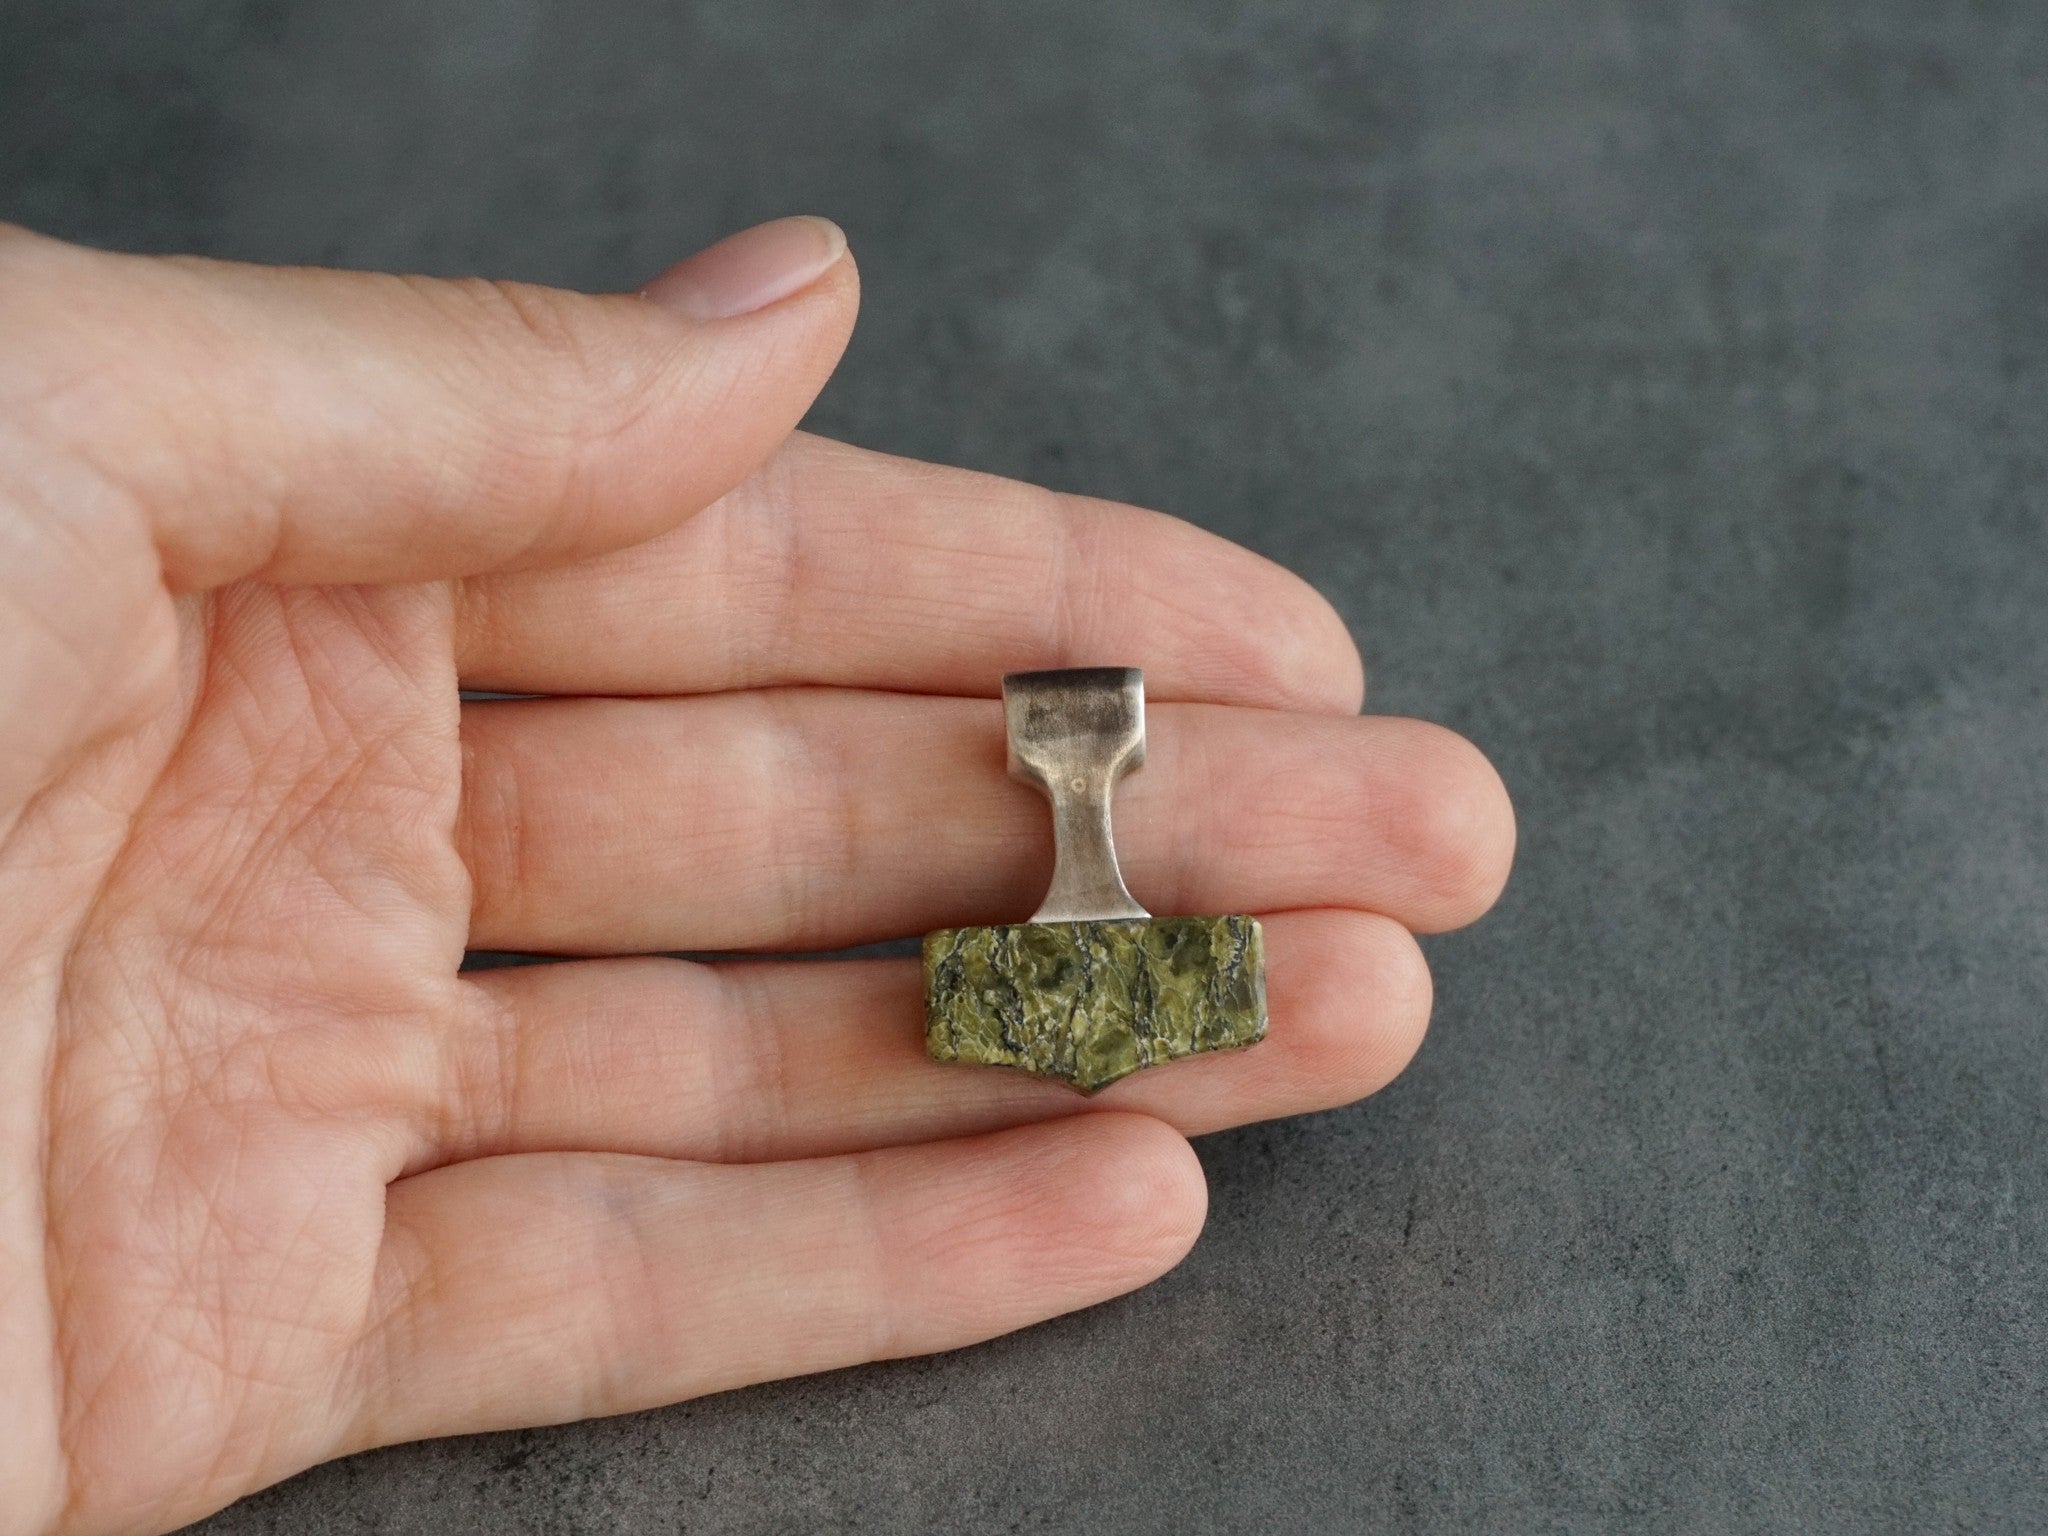 small hammer pendant made of silver and green stone